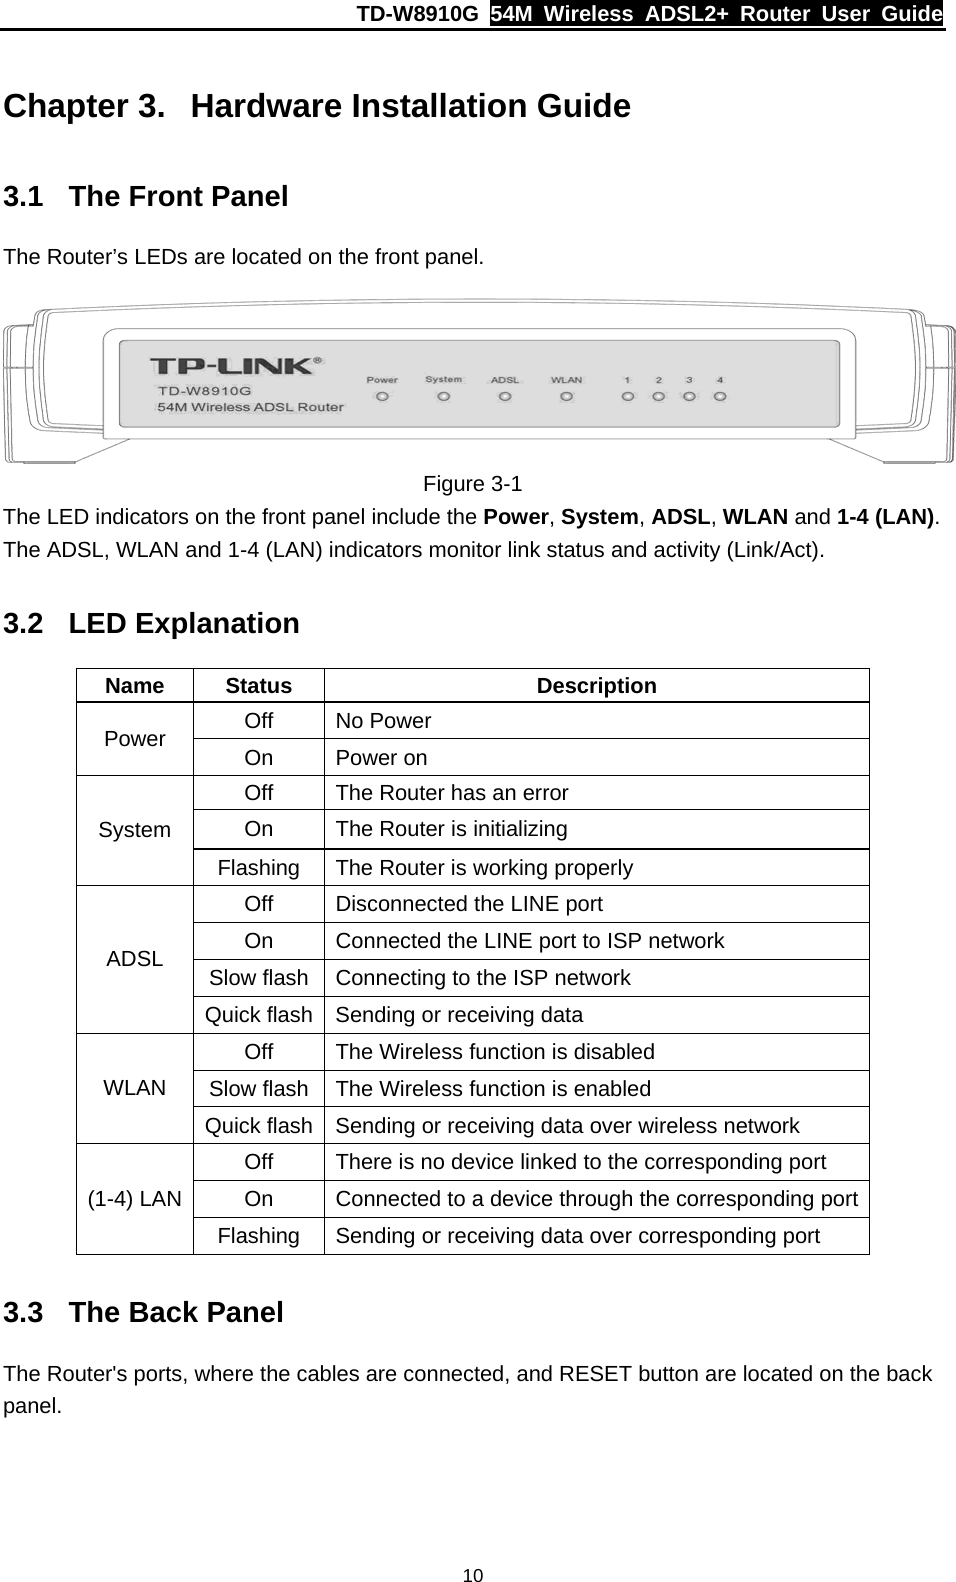 TD-W8910G  54M Wireless ADSL2+ Router User Guide  10 Chapter 3.  Hardware Installation Guide 3.1  The Front Panel The Router’s LEDs are located on the front panel.  Figure 3-1 The LED indicators on the front panel include the Power, System, ADSL, WLAN and 1-4 (LAN). The ADSL, WLAN and 1-4 (LAN) indicators monitor link status and activity (Link/Act). 3.2 LED Explanation Name Status  Description Off No Power Power  On Power on Off  The Router has an error On  The Router is initializing System Flashing  The Router is working properly Off  Disconnected the LINE port On    Connected the LINE port to ISP network   Slow flash  Connecting to the ISP network ADSL Quick flash  Sending or receiving data Off  The Wireless function is disabled Slow flash  The Wireless function is enabled WLAN Quick flash  Sending or receiving data over wireless network Off  There is no device linked to the corresponding port On  Connected to a device through the corresponding port (1-4) LAN Flashing  Sending or receiving data over corresponding port 3.3  The Back Panel The Router&apos;s ports, where the cables are connected, and RESET button are located on the back panel. 